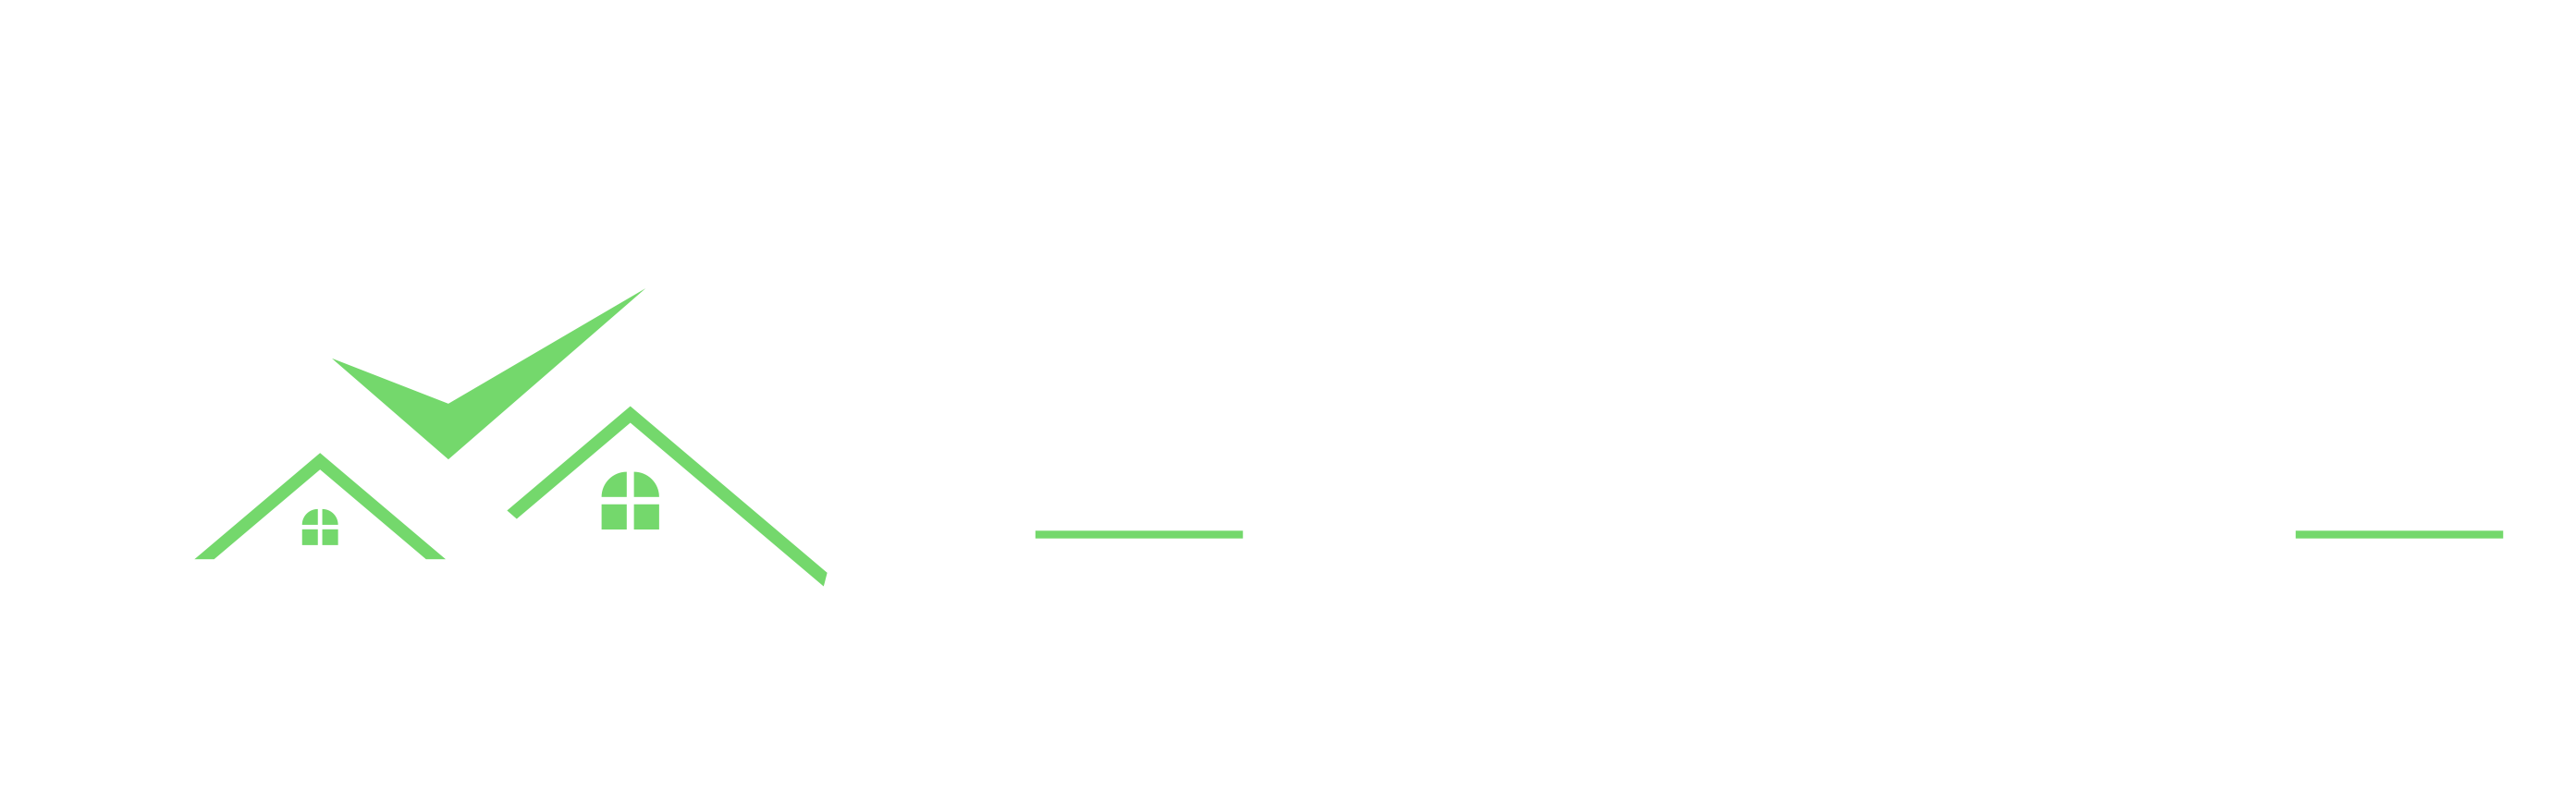 Clement Construction & Specialty Services logo